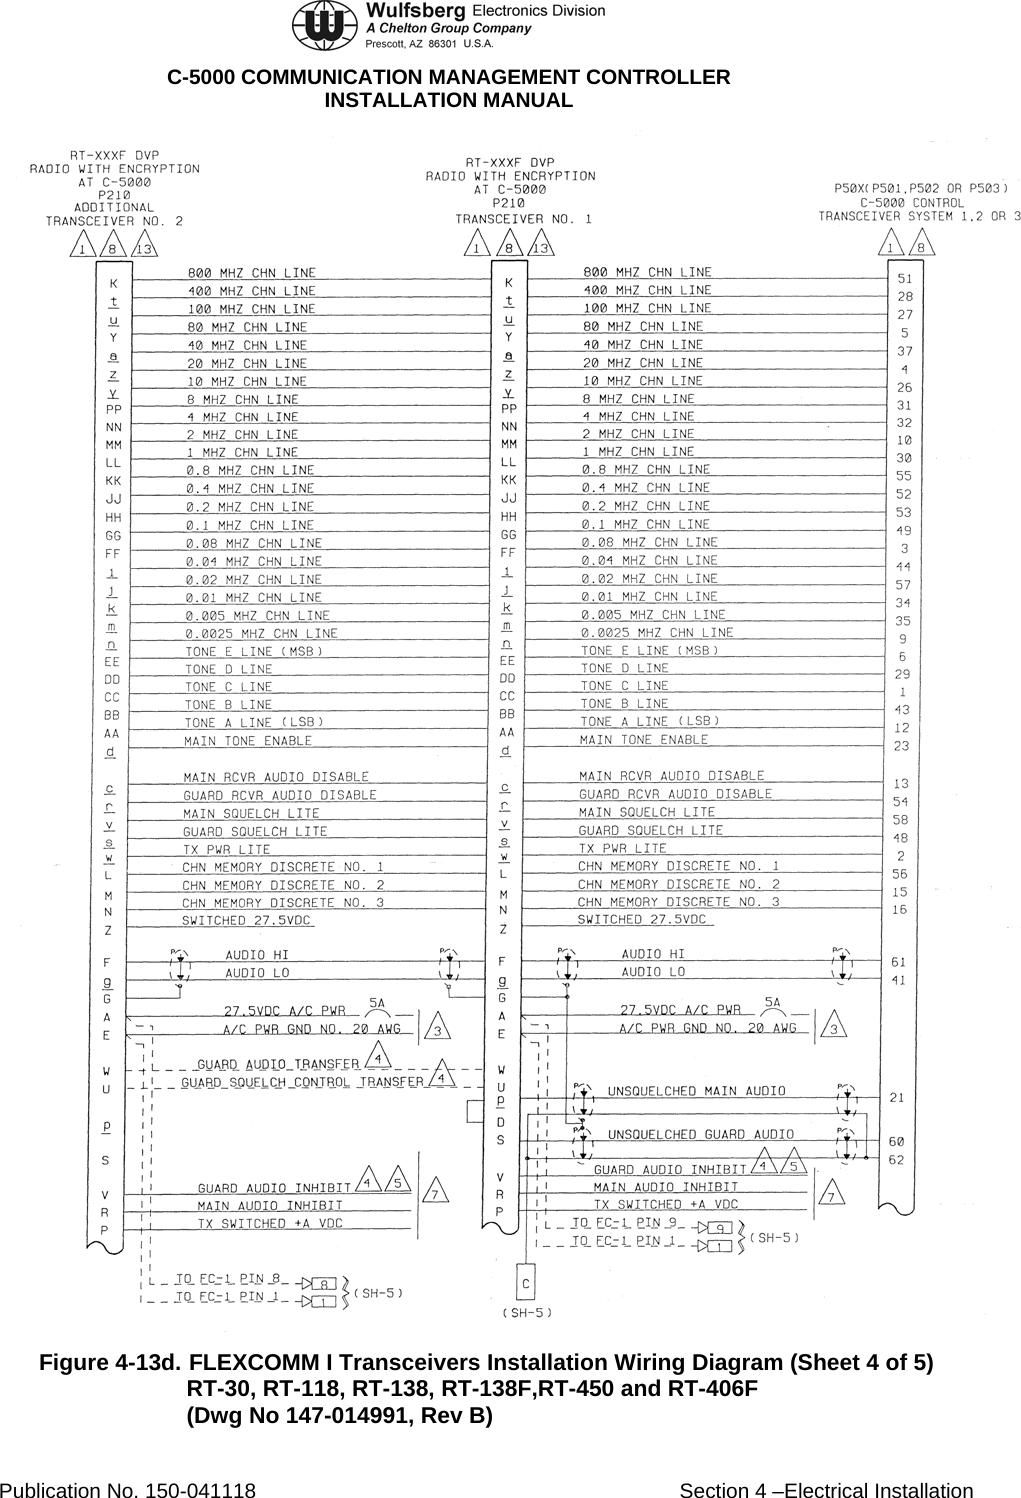  C-5000 COMMUNICATION MANAGEMENT CONTROLLER INSTALLATION MANUAL  Figure 4-13d. FLEXCOMM I Transceivers Installation Wiring Diagram (Sheet 4 of 5) RT-30, RT-118, RT-138, RT-138F,RT-450 and RT-406F (Dwg No 147-014991, Rev B) Publication No. 150-041118  Section 4 –Electrical Installation 